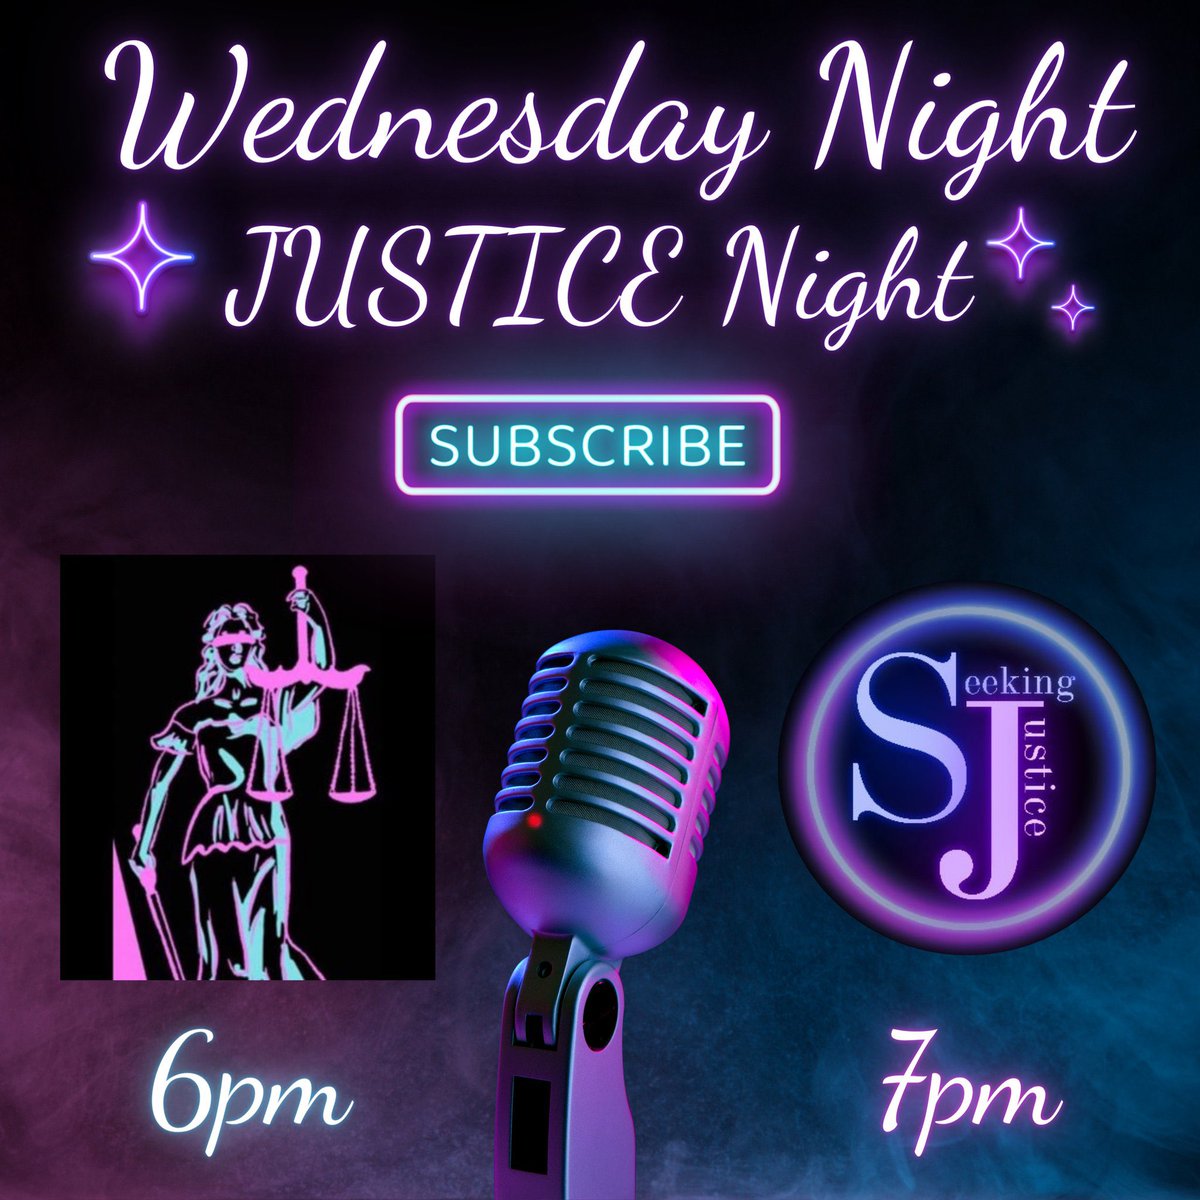 Special edition of Wednesday Night Justice TONIGHT! First at 6PM @Catch_Justice THEN at 7PM @Catch_LISK will be joining us LIVE. Hope to see you in the chats!!